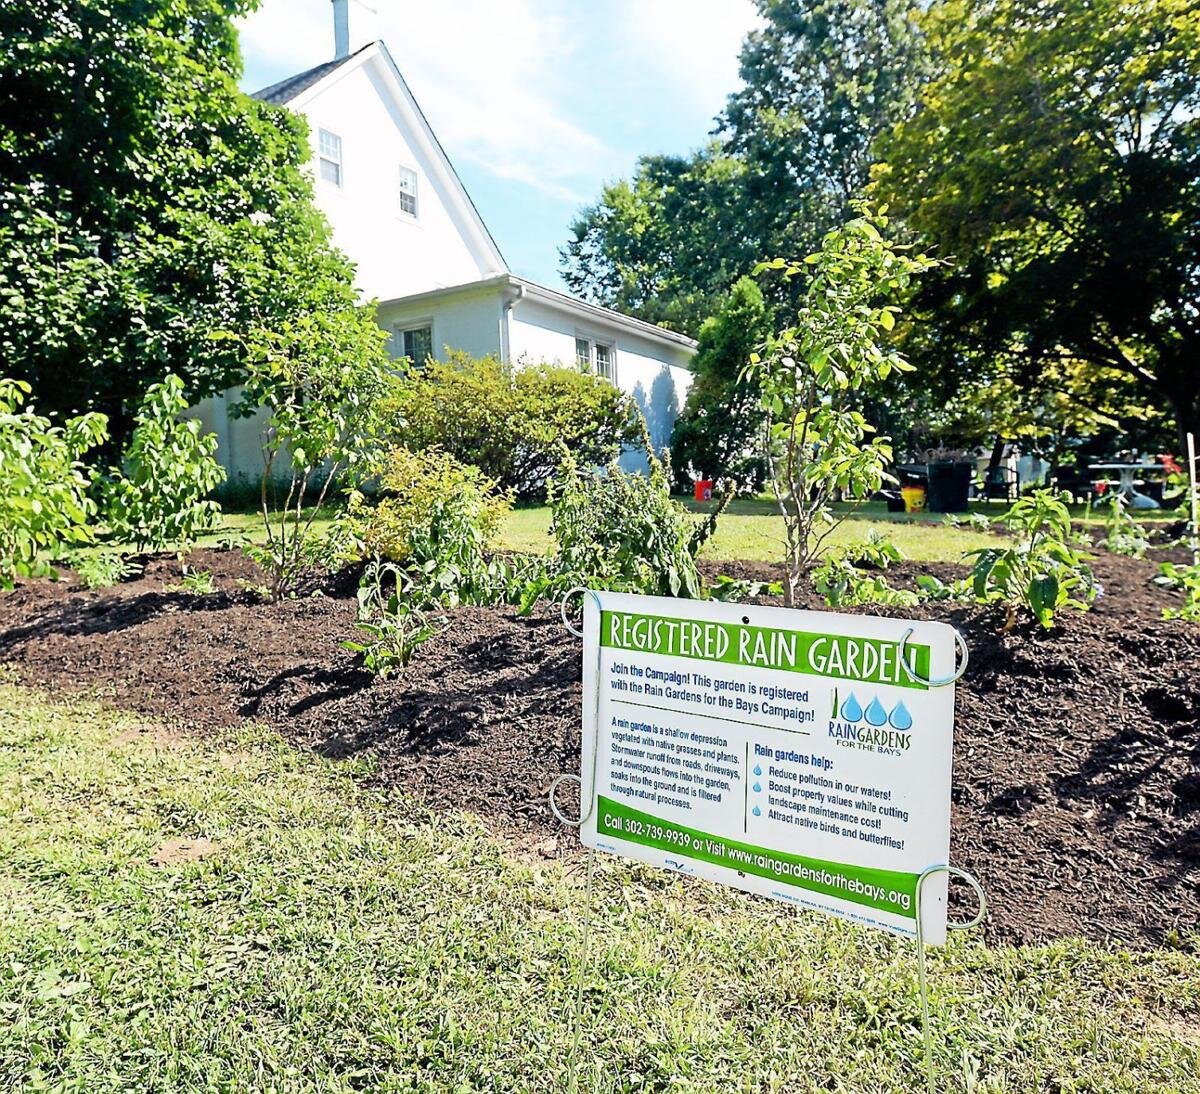 Coalition For The Delaware River Watershed Rain Gardens For